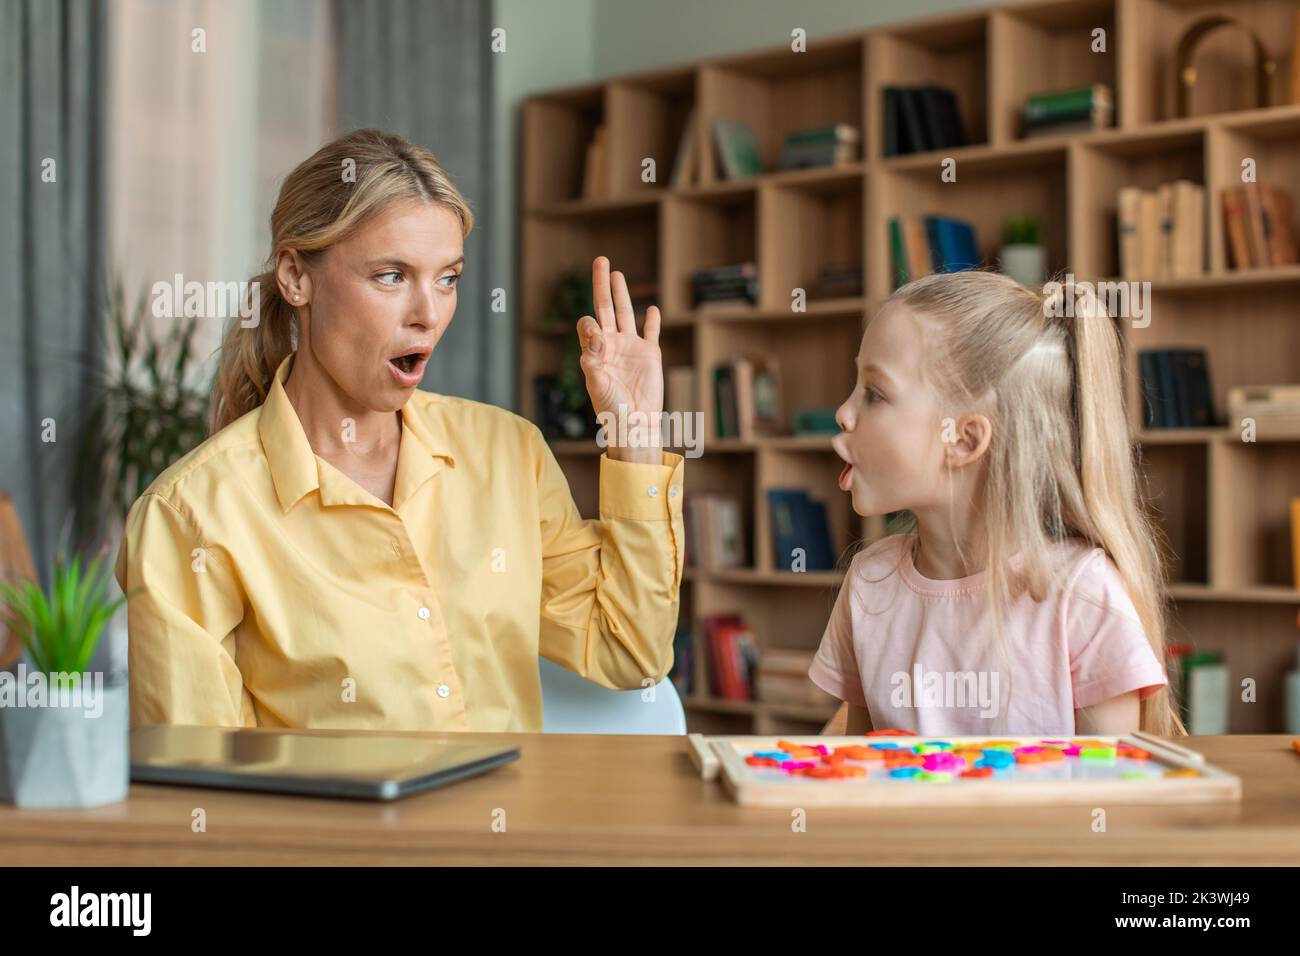 Professional female speech therapist studying together with little kid girl, learning practice pronunciation exercises Stock Photo